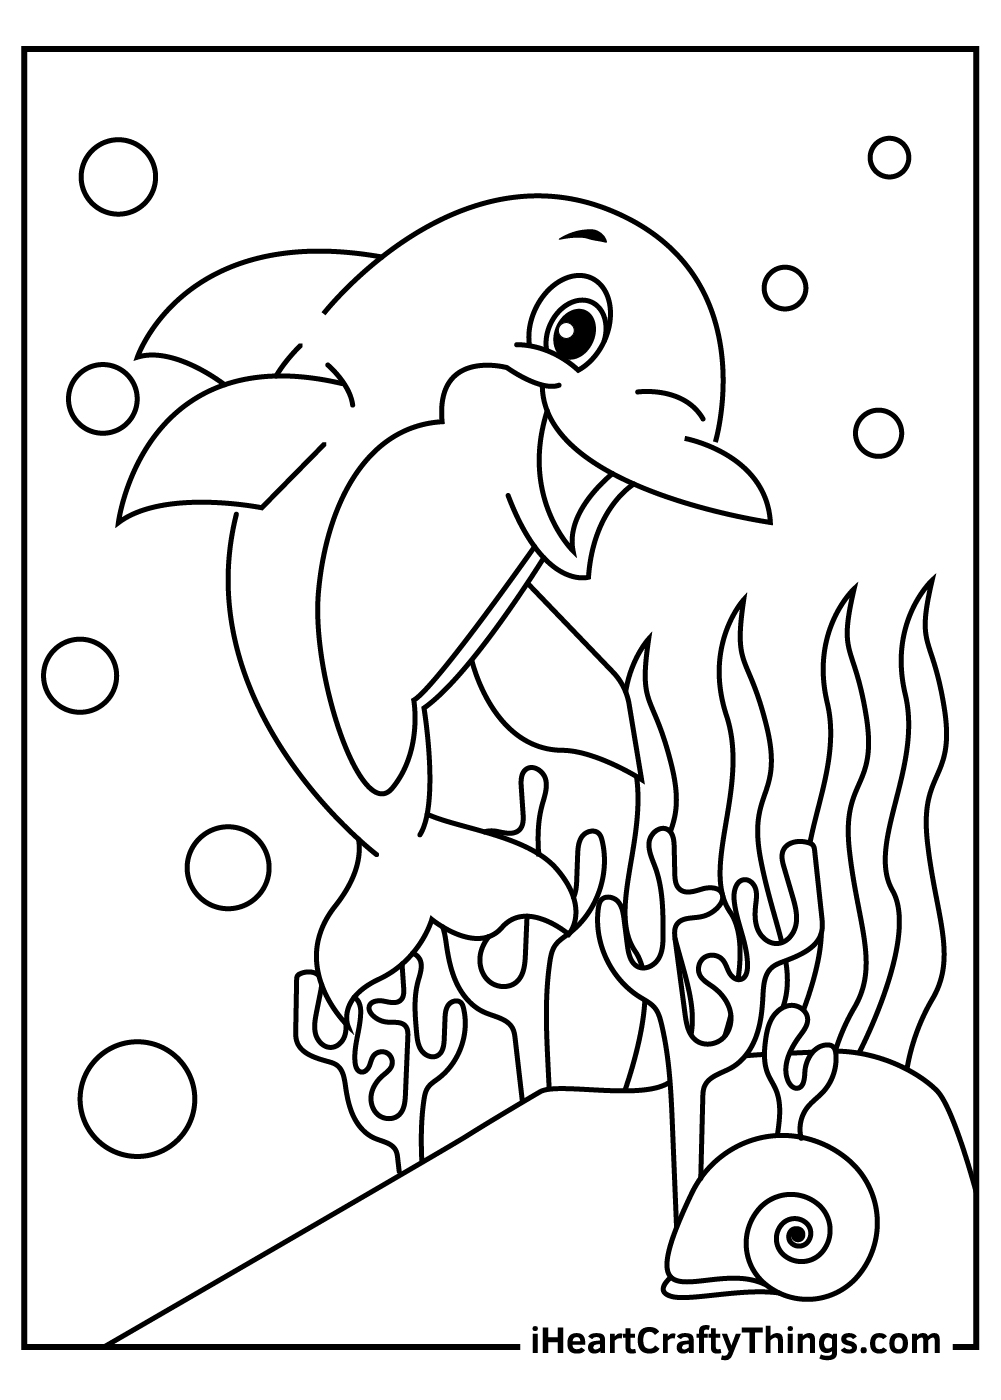 Simple Animal Coloring Pages Updated 20